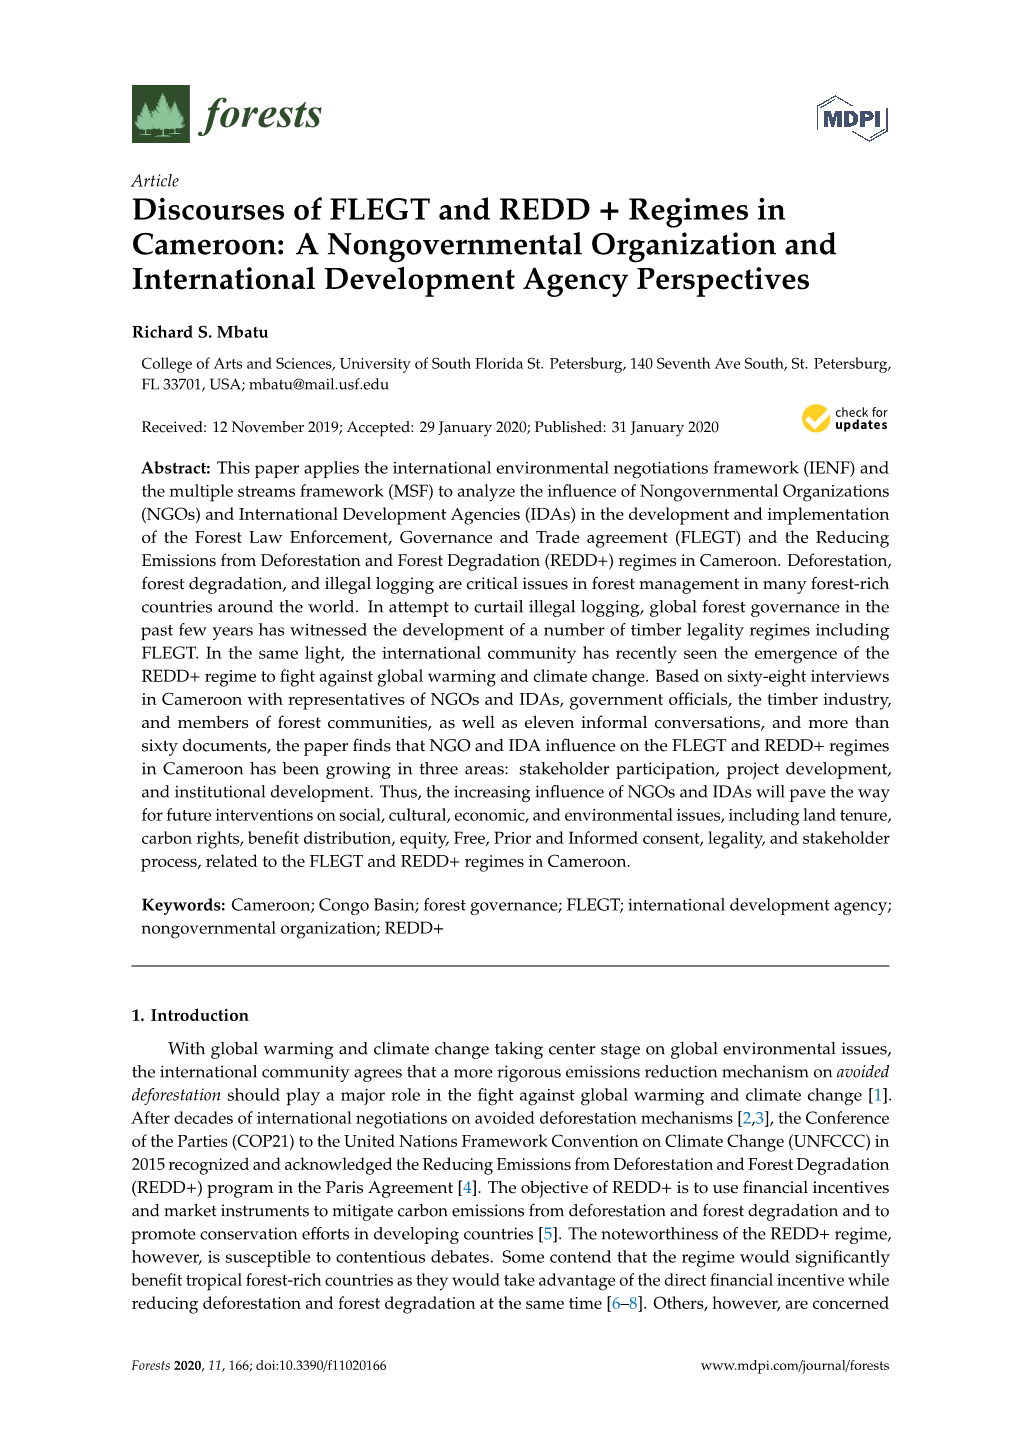 Discourses of FLEGT and REDD + Regimes in Cameroon: a Nongovernmental Organization and International Development Agency Perspectives